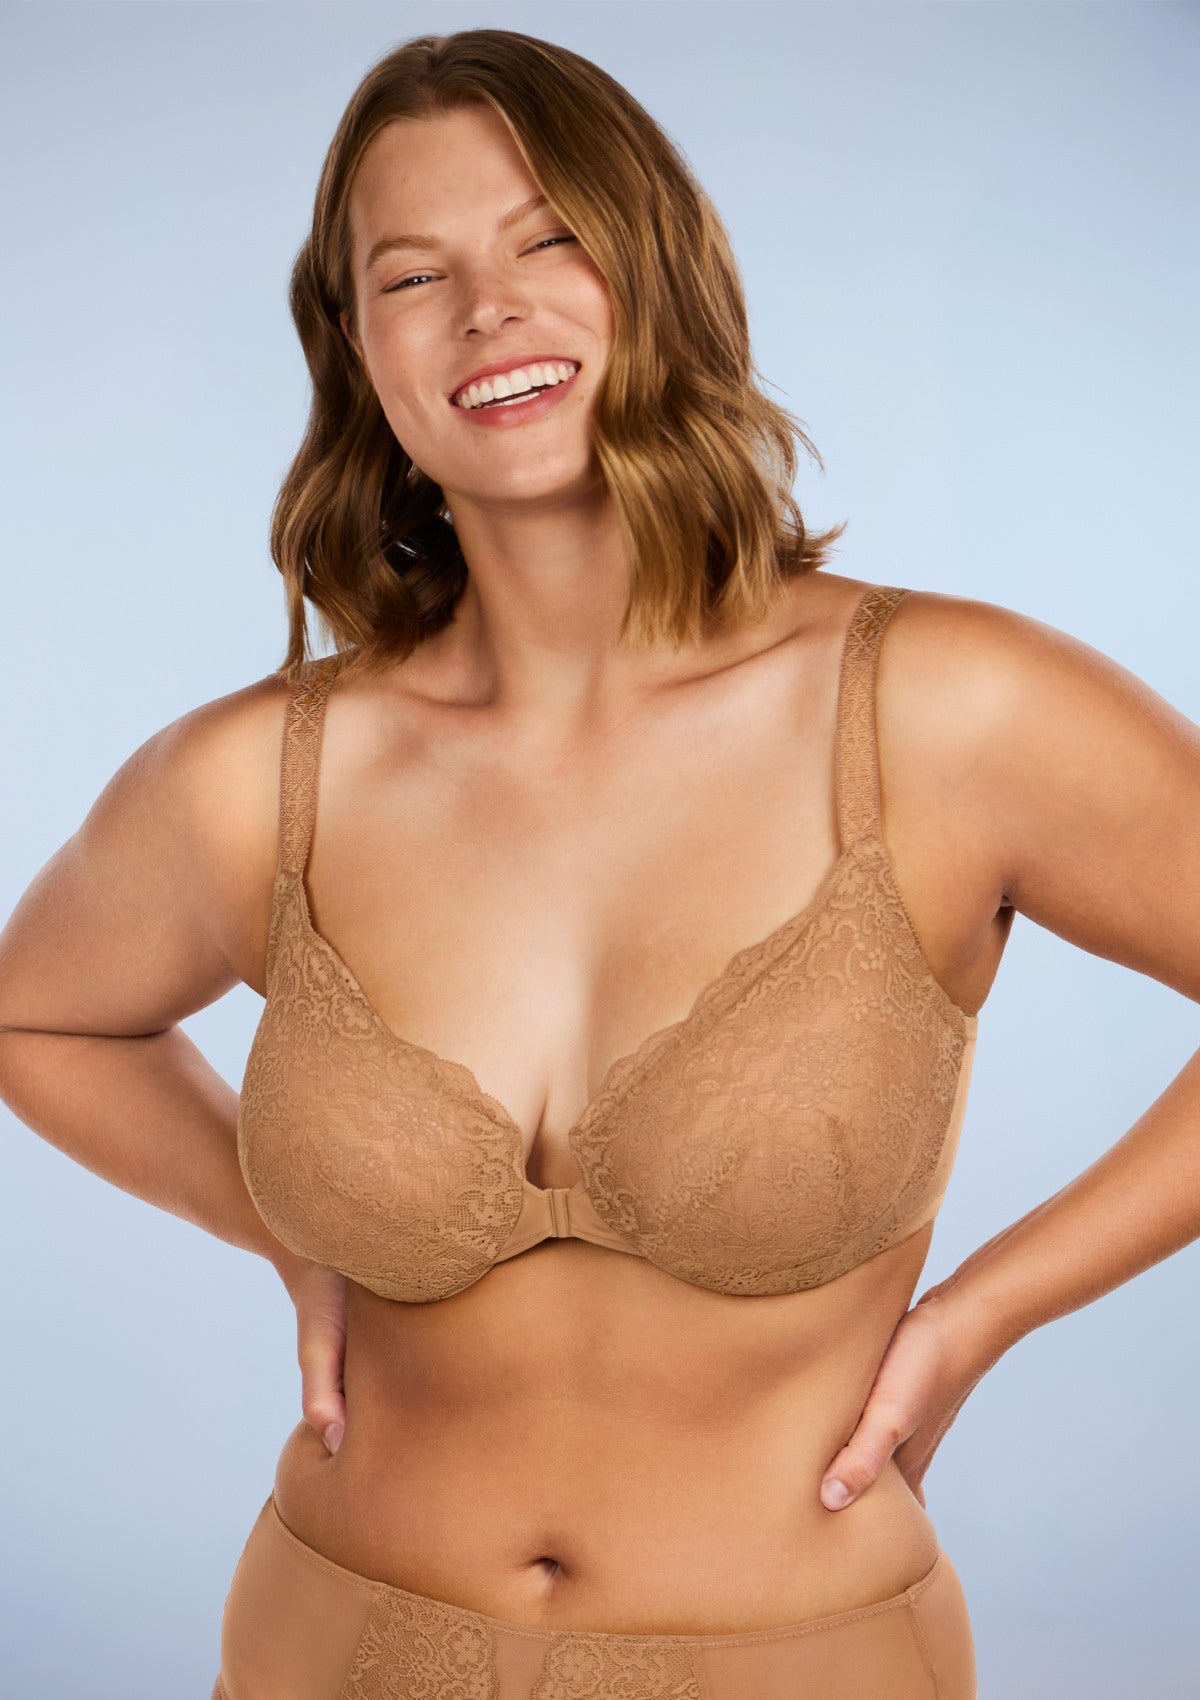 HSIA Nymphaea Easy-to-wear Front-Close Lace Unlined Underwire Bra - Dusty Peach / 42 / C